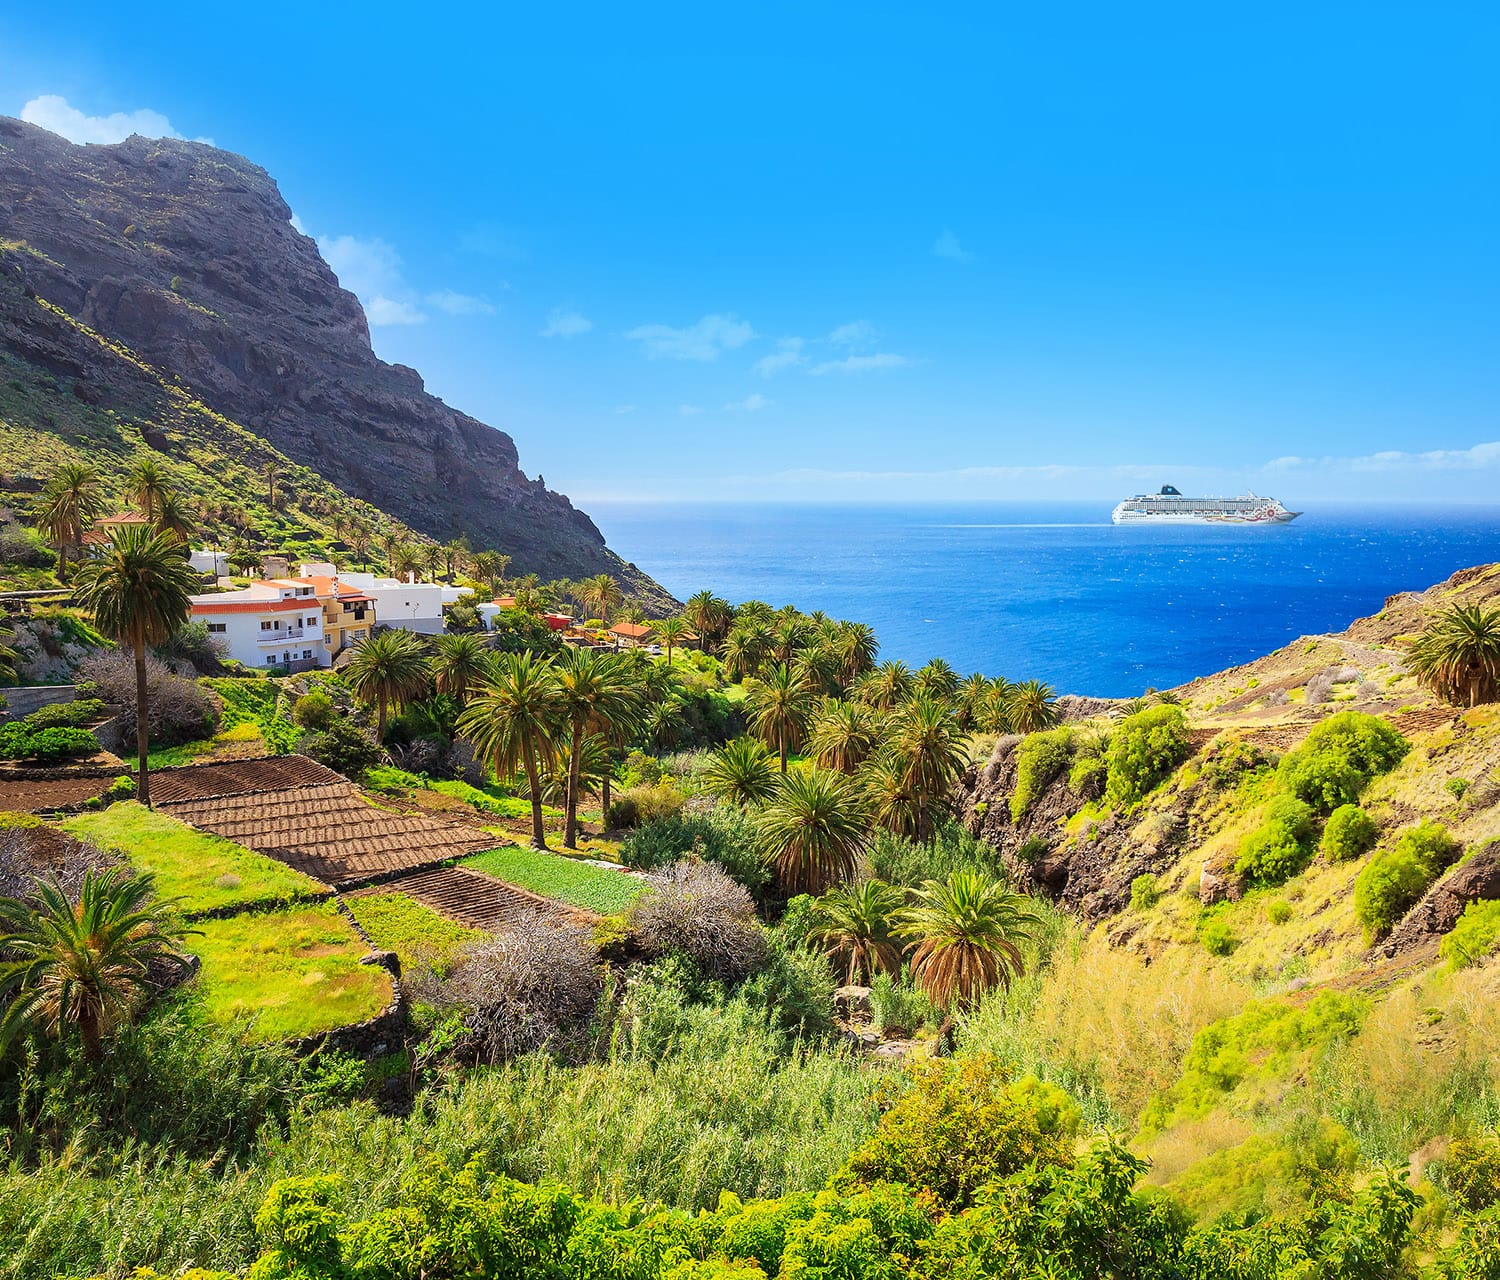 canary island cruises in october